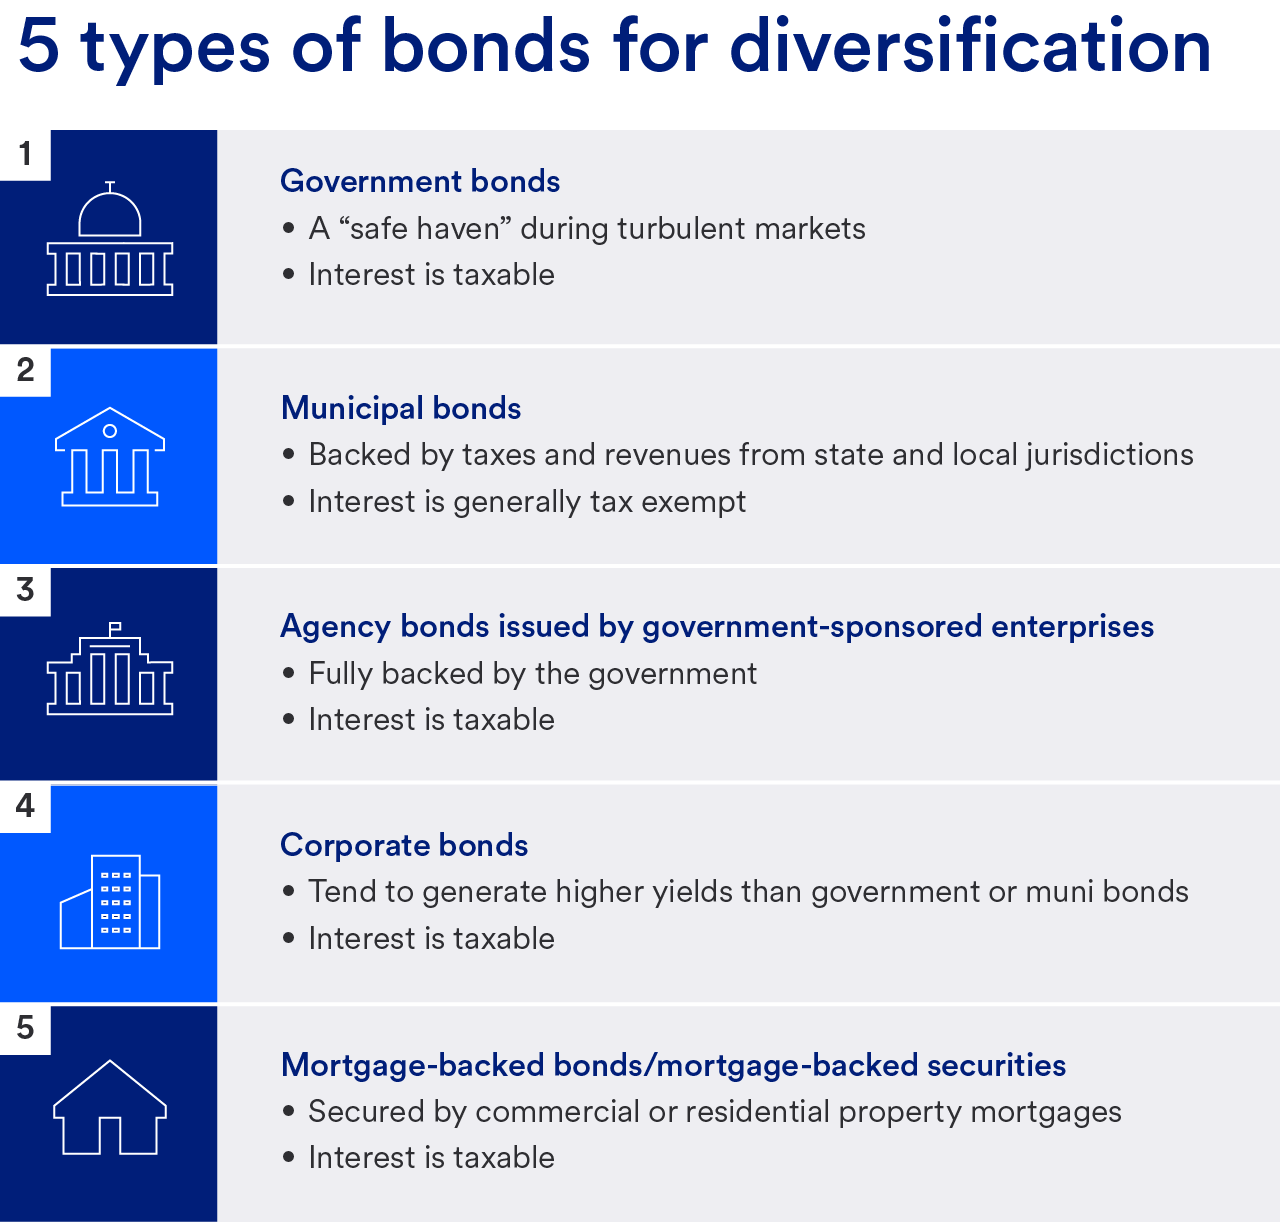 Infographic depicts details on the 5 different kinds of bonds for diversification.